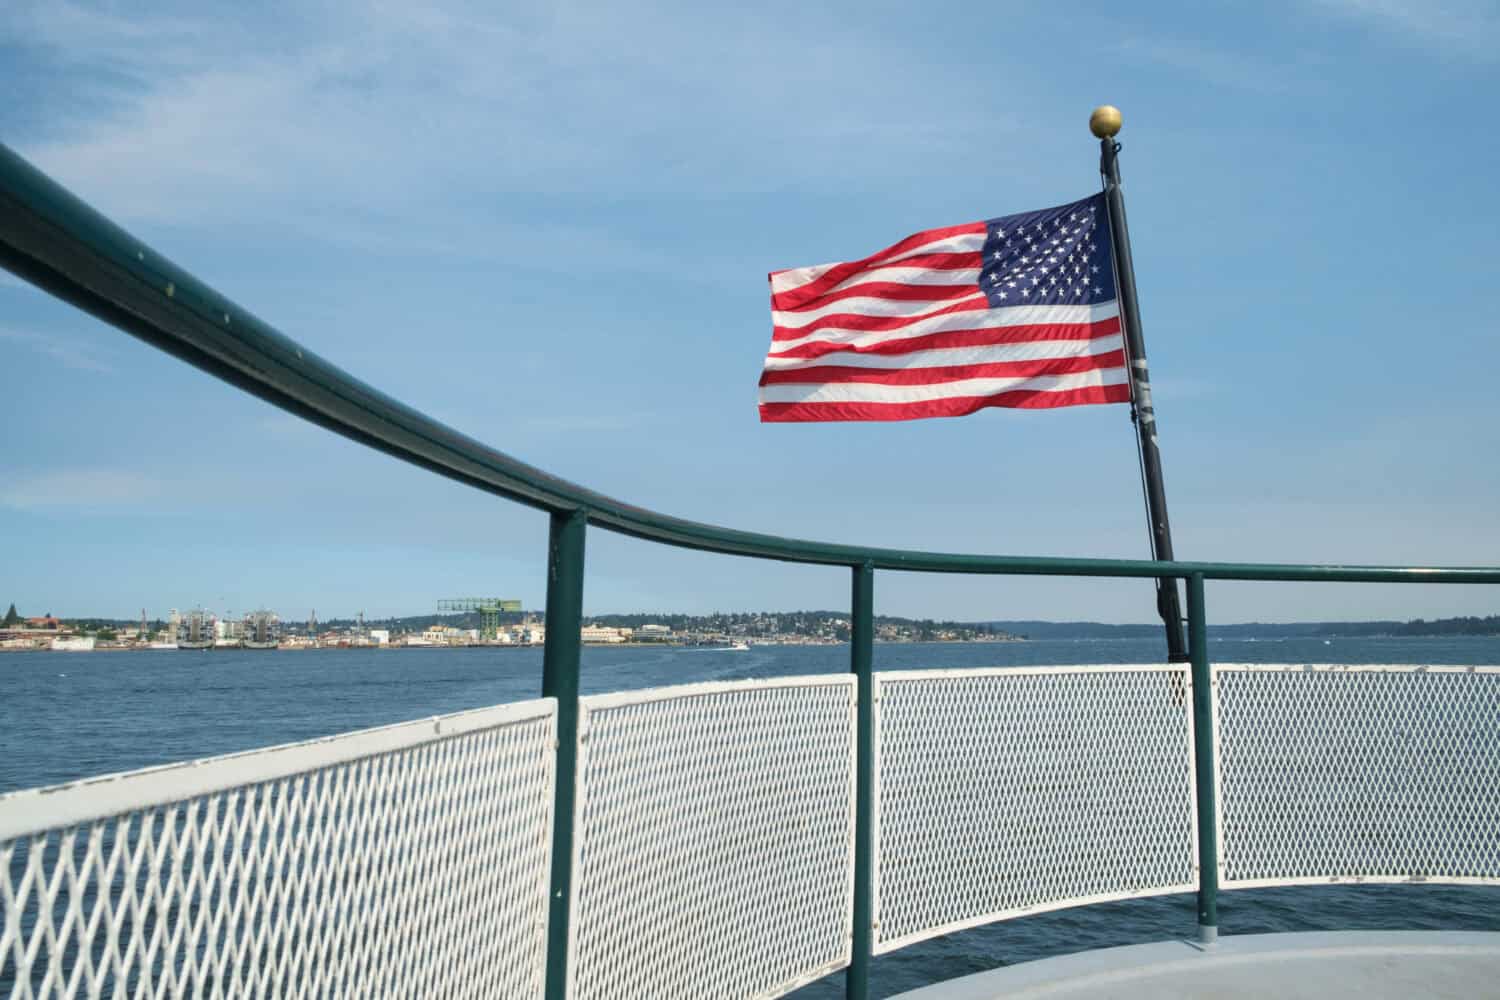 American flag blowing in breeze at stern of passenger ferry crossing Sinclair Inlet from Bremerton, Washington to Port Orchard, Washington with Puget Sound Naval Shipyard in background